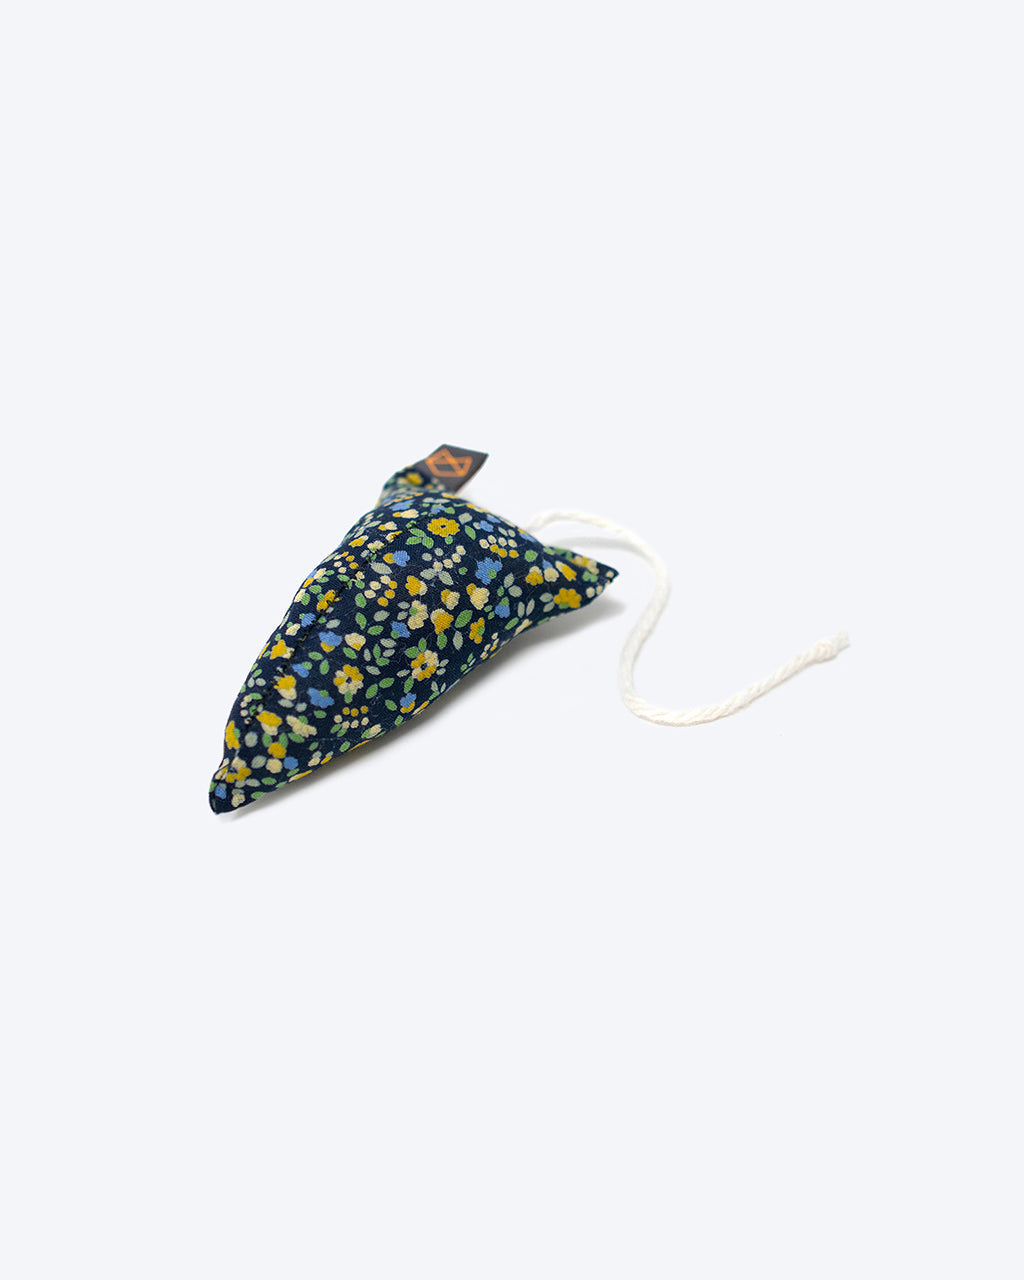 PET TOY MODERN MOUSE - FLORAL by MODERNBEAST